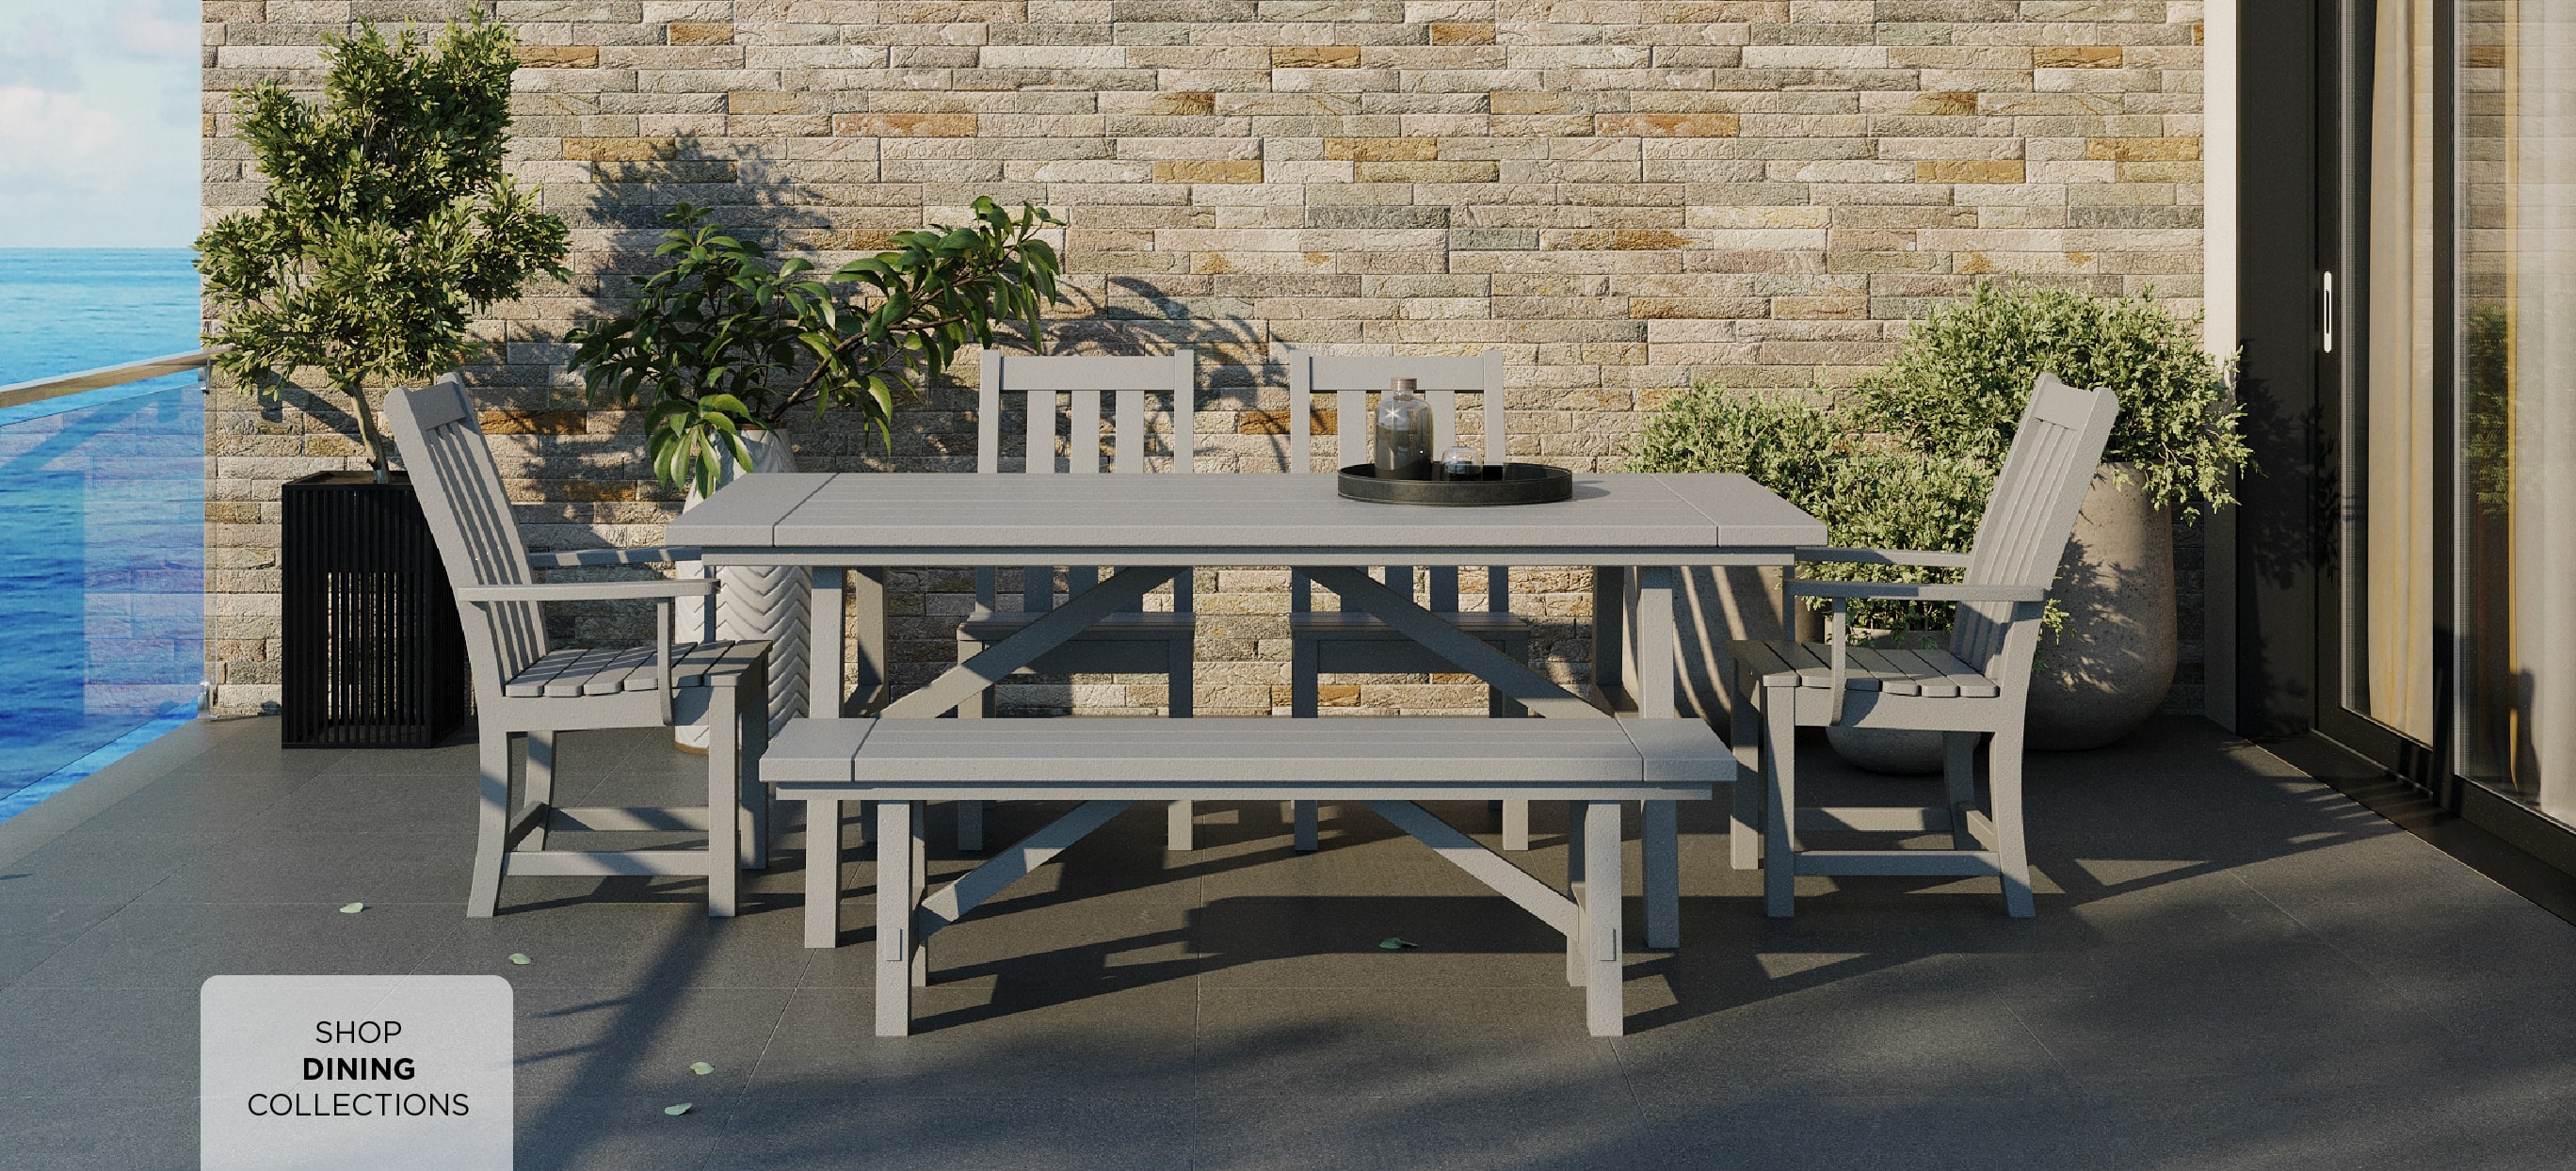 Save up to 25% on Patio